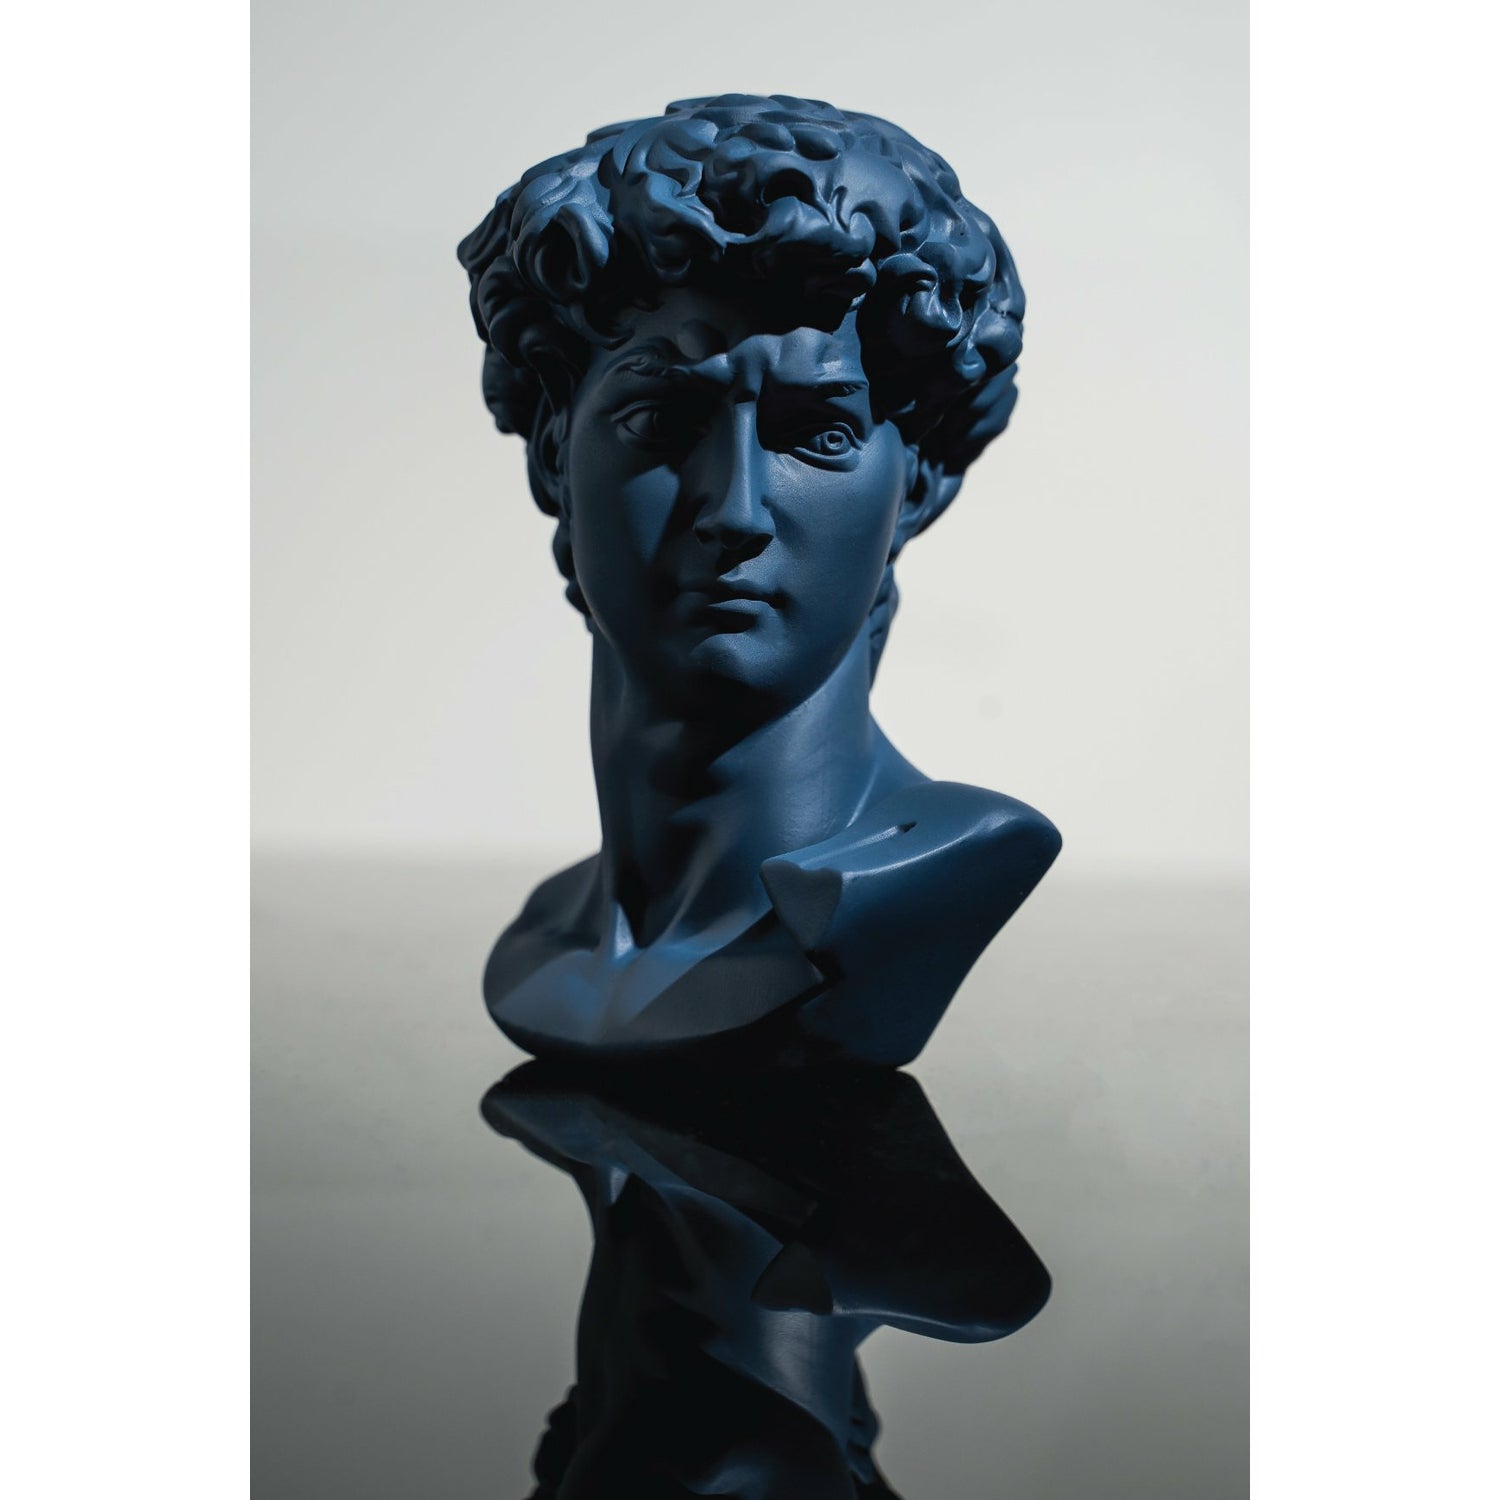 Navy Blue David Bust Sculpture - Our Navy Blue David Bust Sculpture is a timeless piece that’s an icon of both Italian and World Art History.